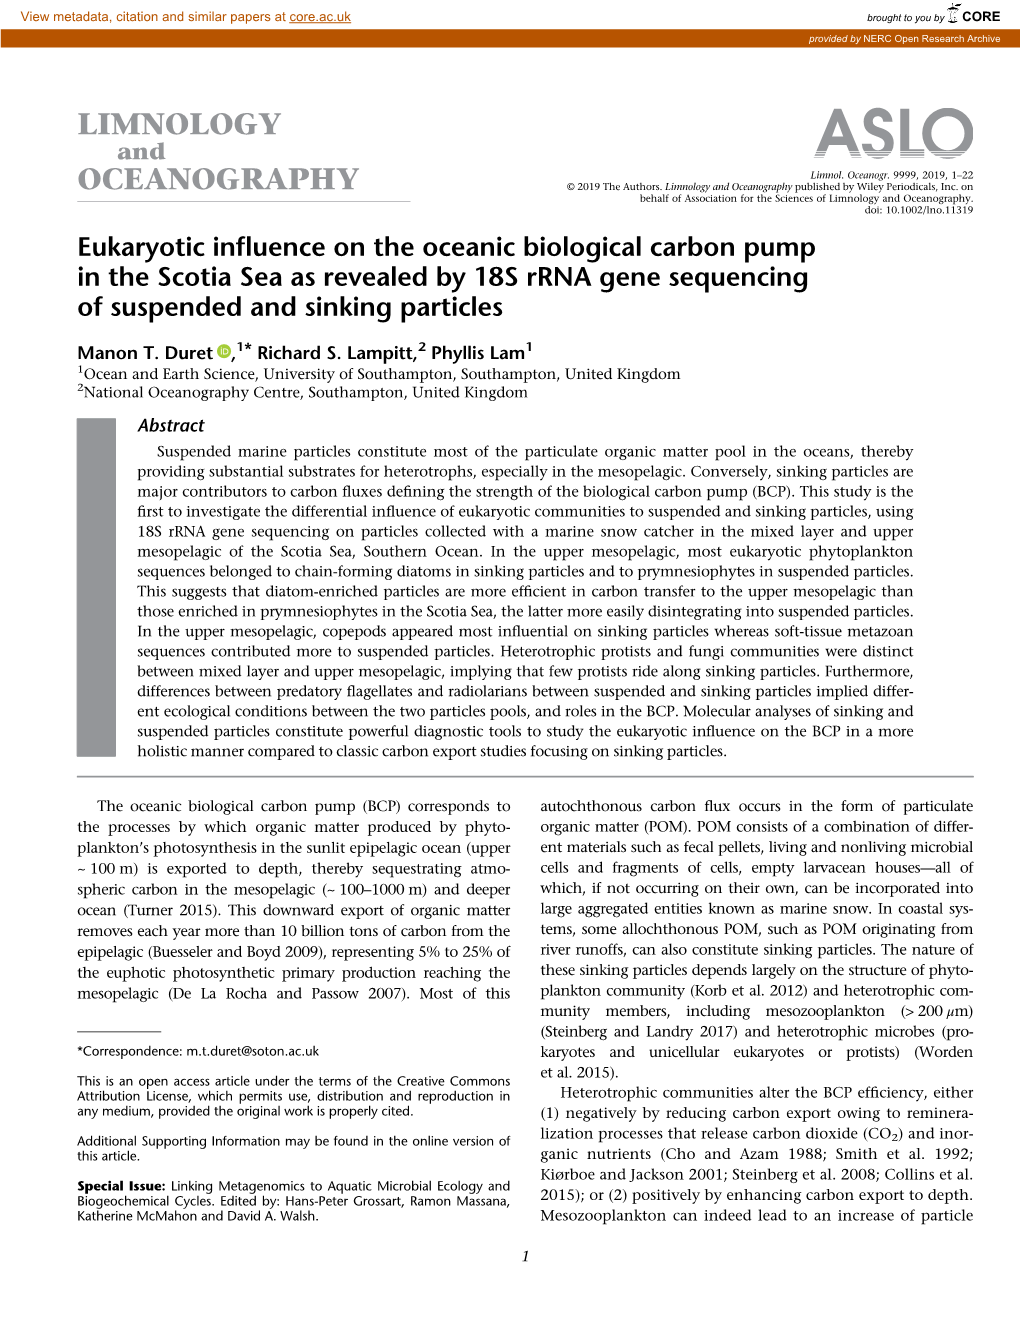 Eukaryotic Influence on the Oceanic Biological Carbon Pump in The